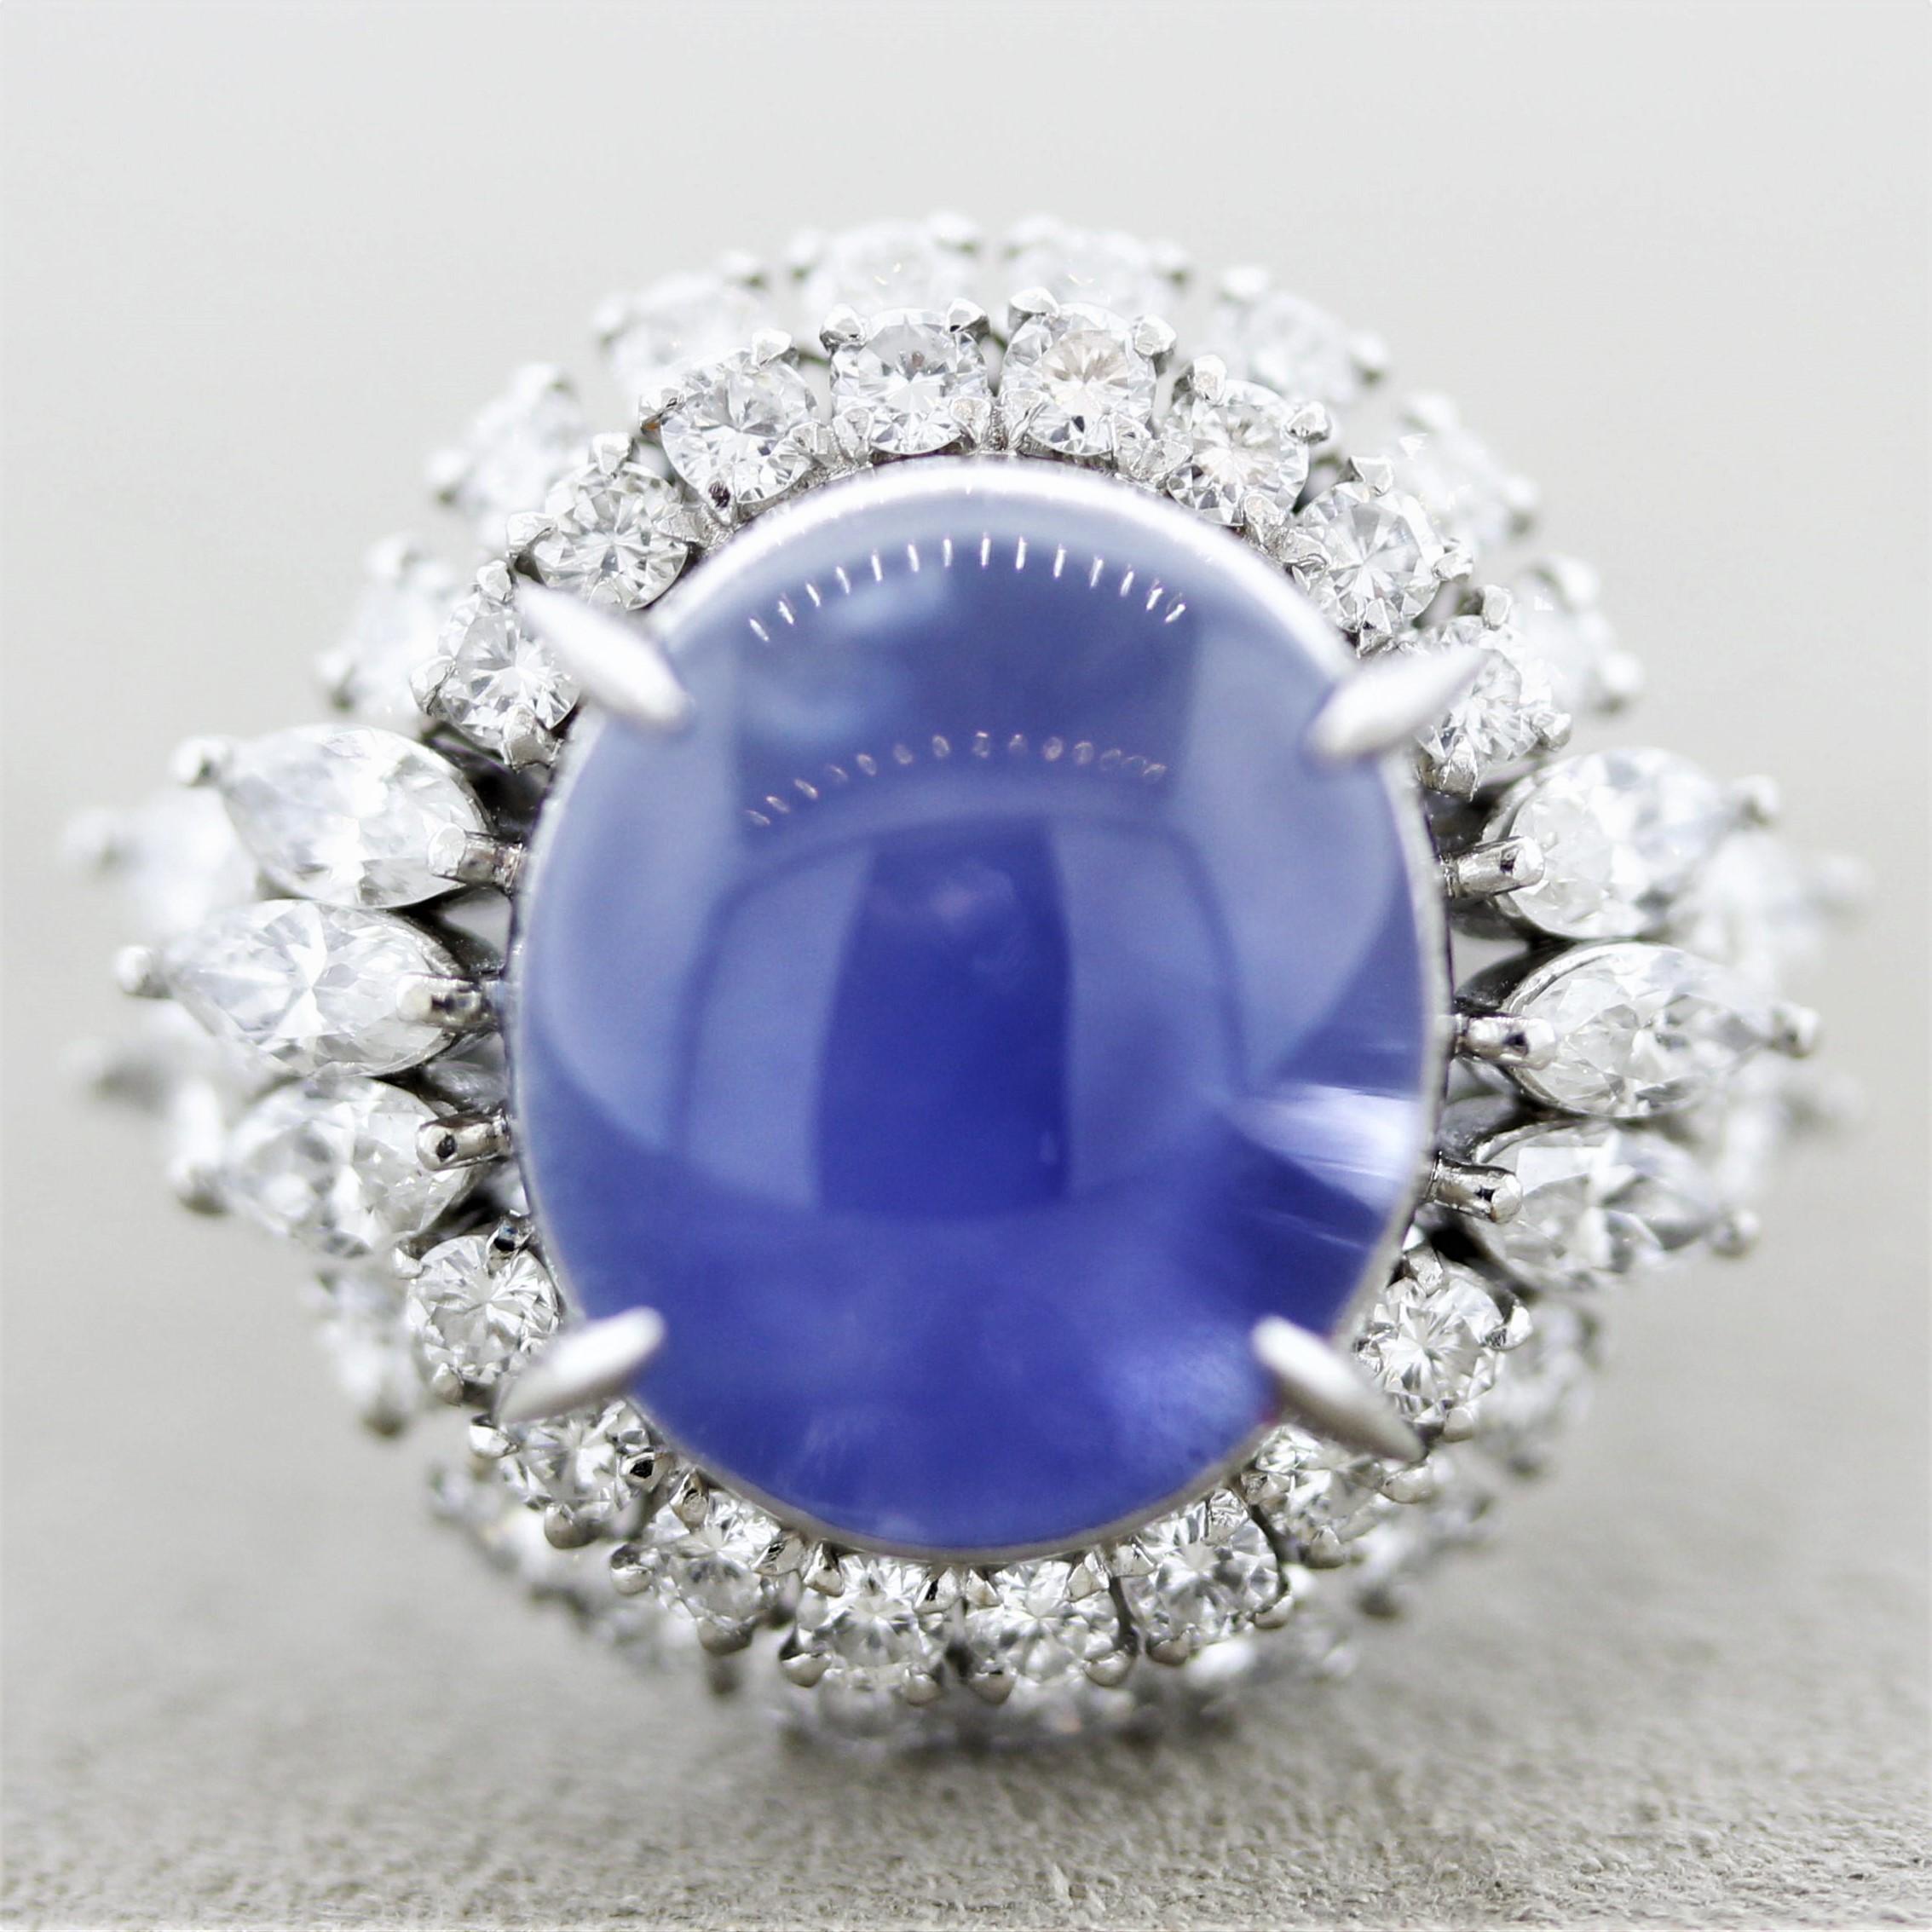 A fine and classy ring featuring a star sapphire dazzled by an array of large bright white diamonds. The sapphire weighs 10.57 carats and has a rich vivid blue color as well as a strong 6-rayed star. The sapphire is also untreated in anyways and has